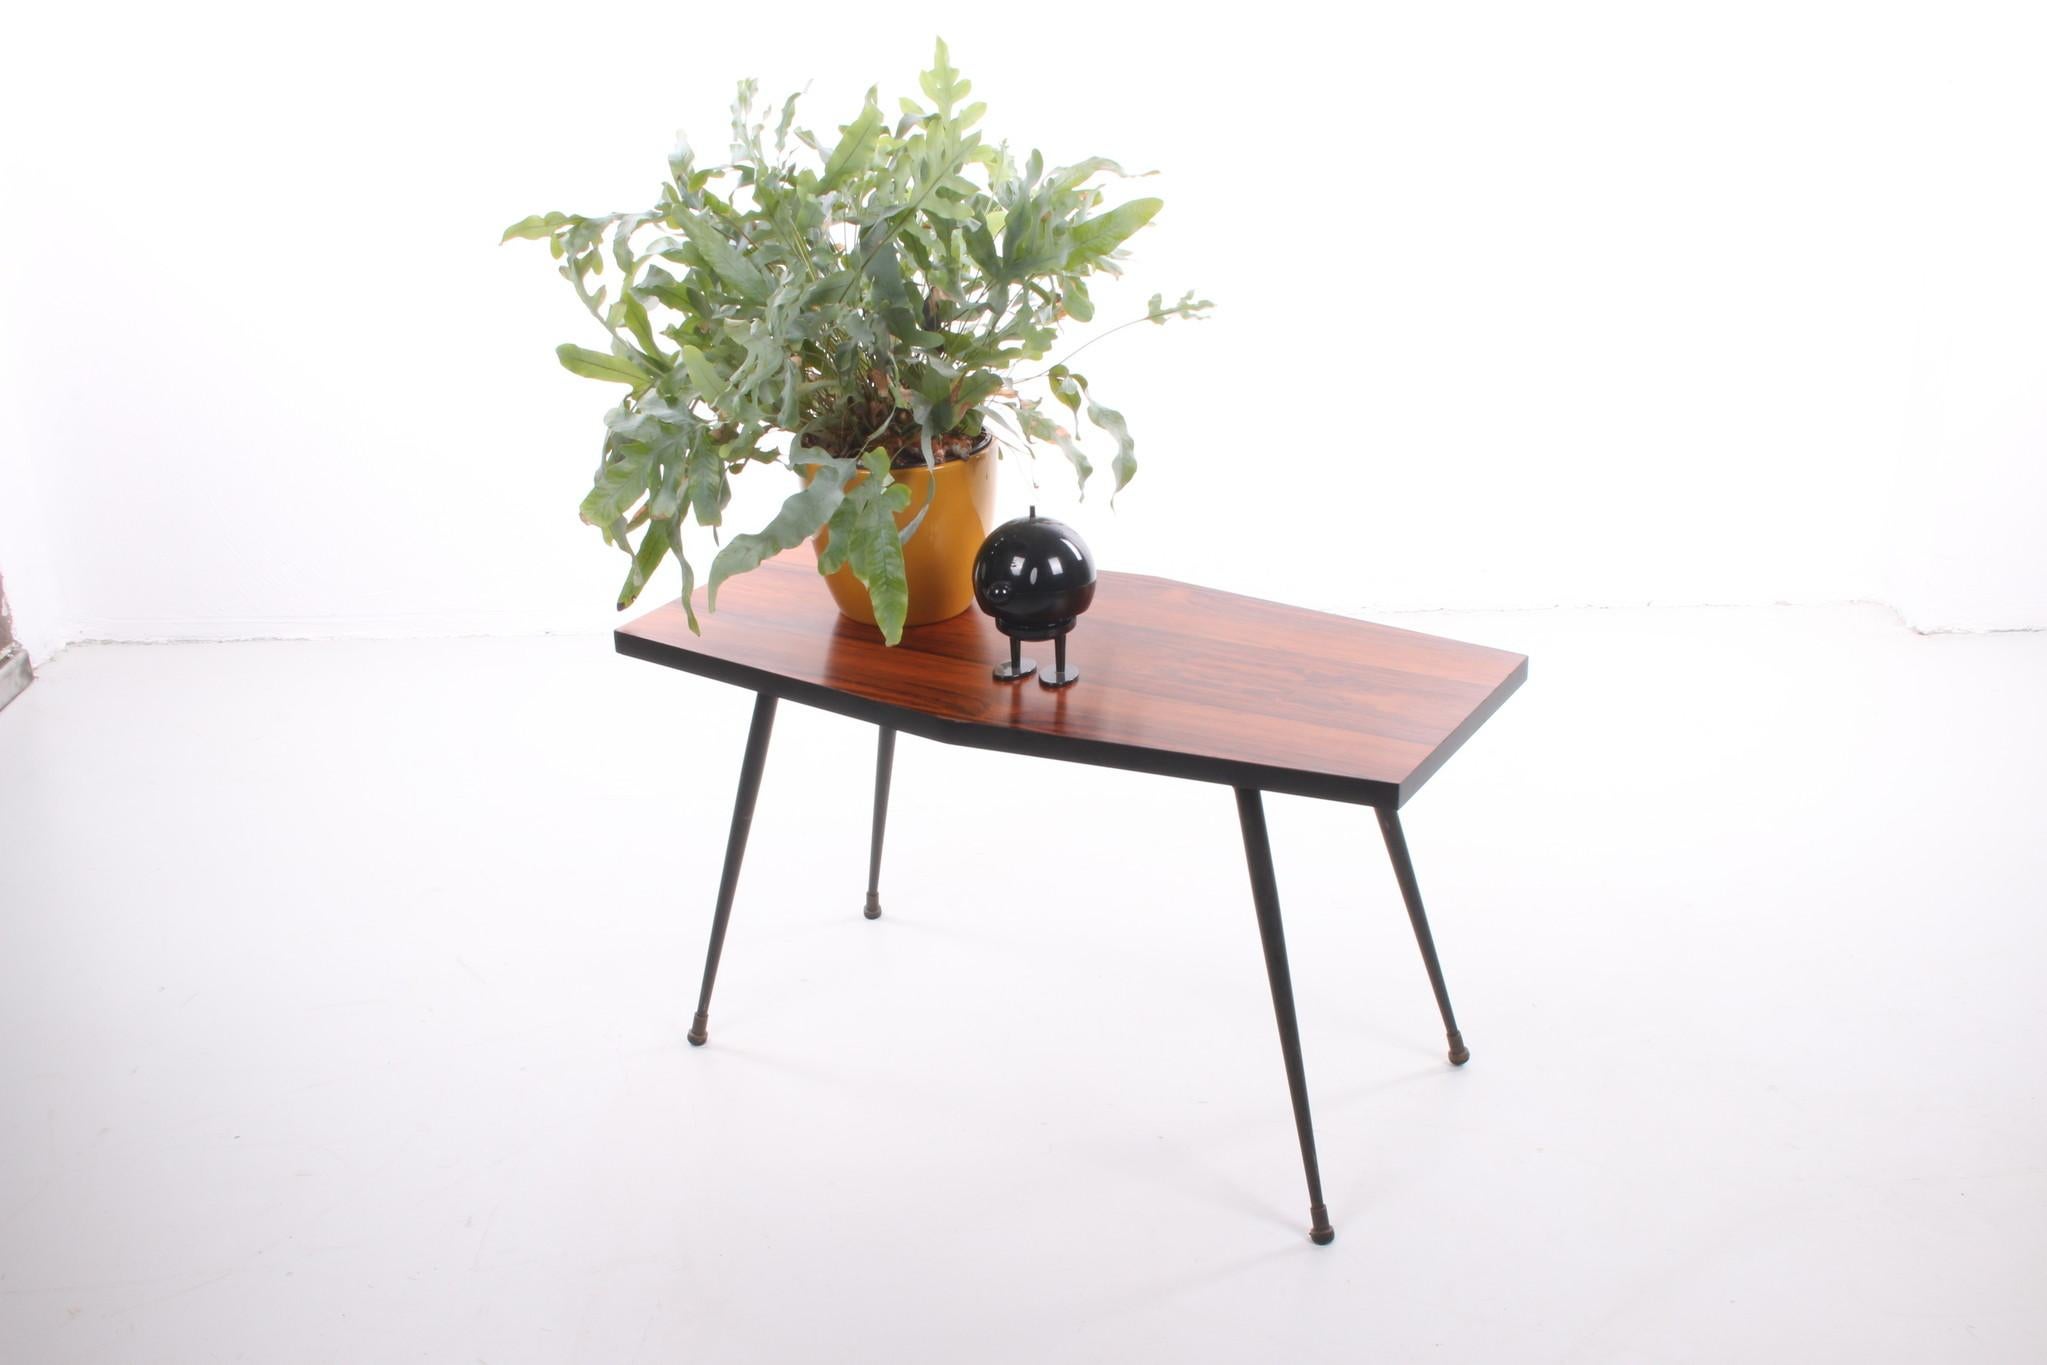 Black wood Plant Table or Side Table with Black Metal Legs, 1960s For Sale 1